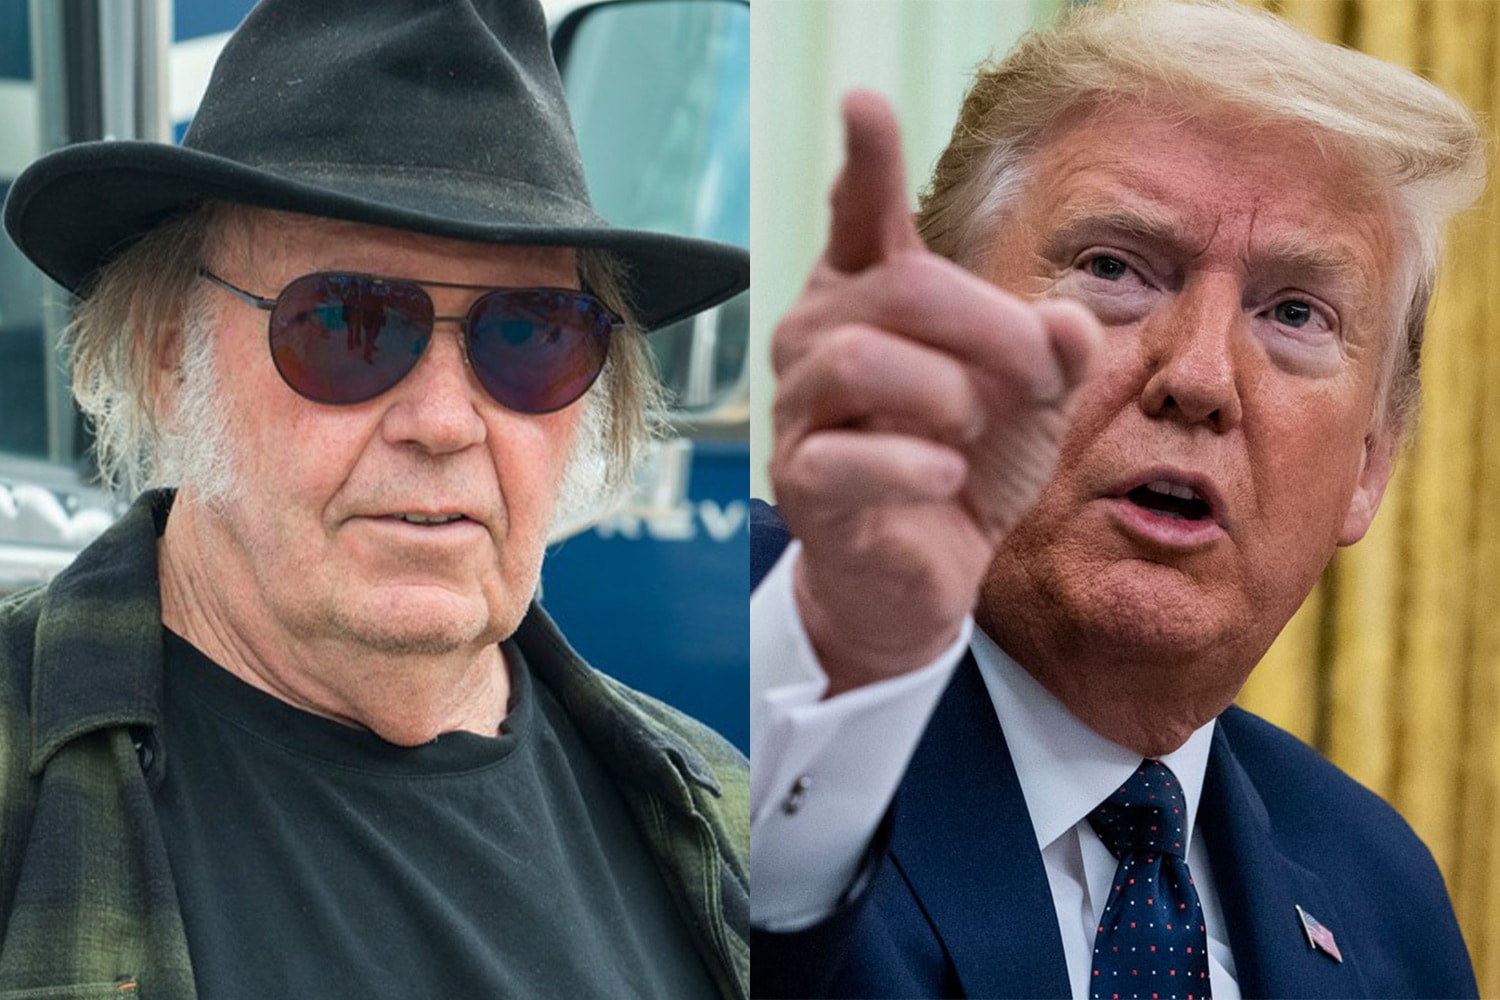 Neil Young Sues Donald Trump for Copyright Infringement Unauthorized Use of Songs President 2020 Election Rockin in the Free World Devils Sidewalk News HYPEBEAST updates